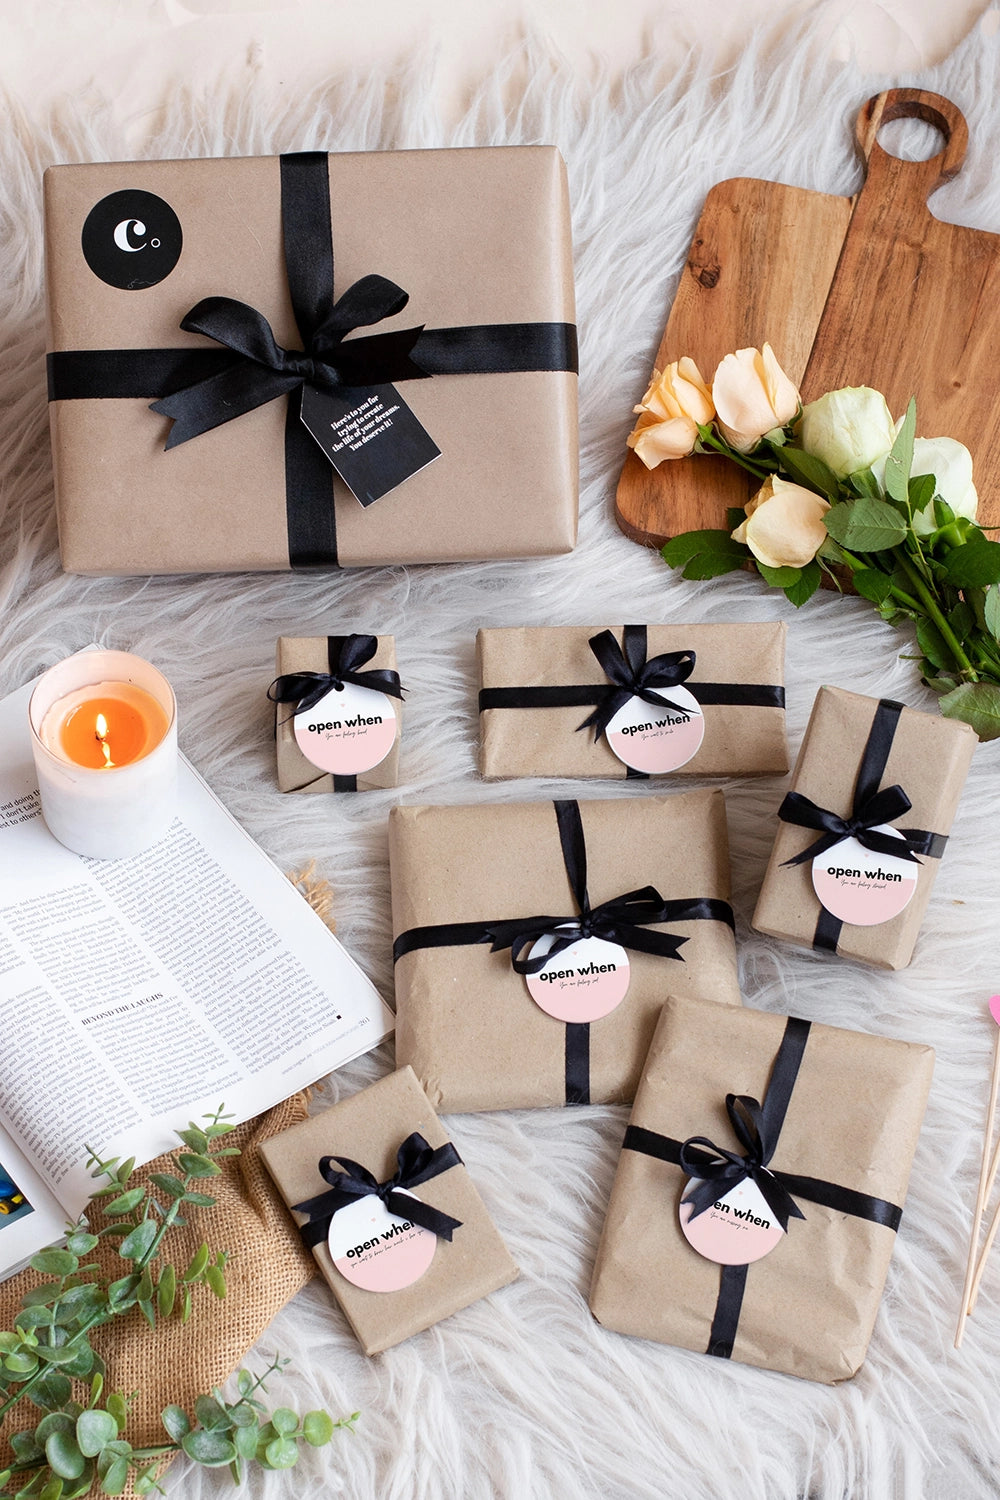 4 secrets to make every gift more meaningful | Hallmark Ideas & Inspiration